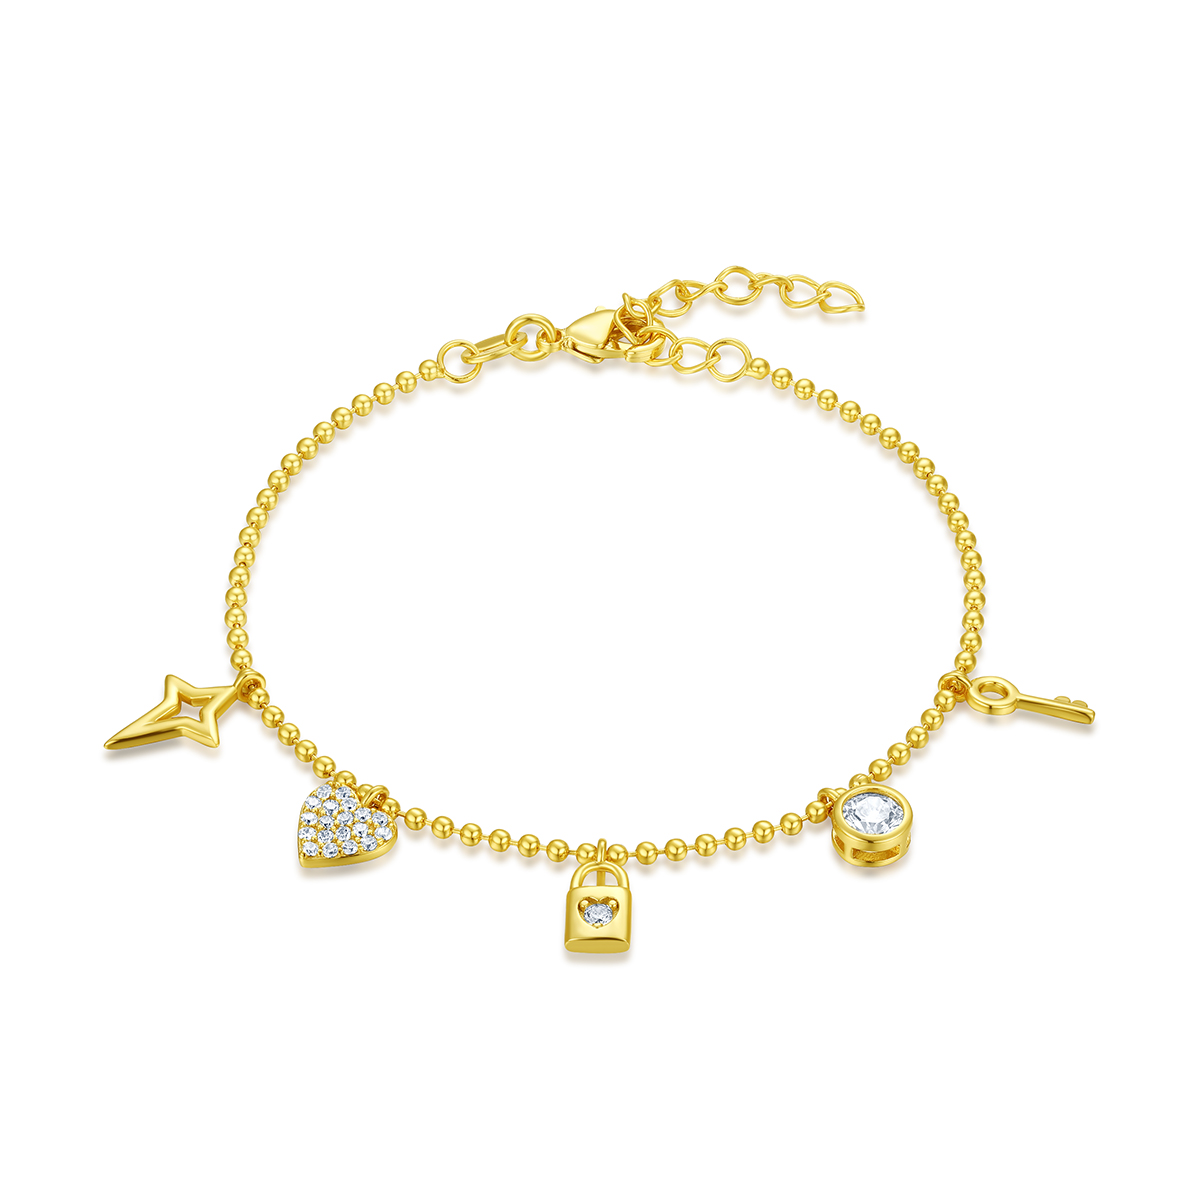 Yellow niche design high-end 925 silver inlaid zircon key lock bracelet hand jewelry suitable for daily use